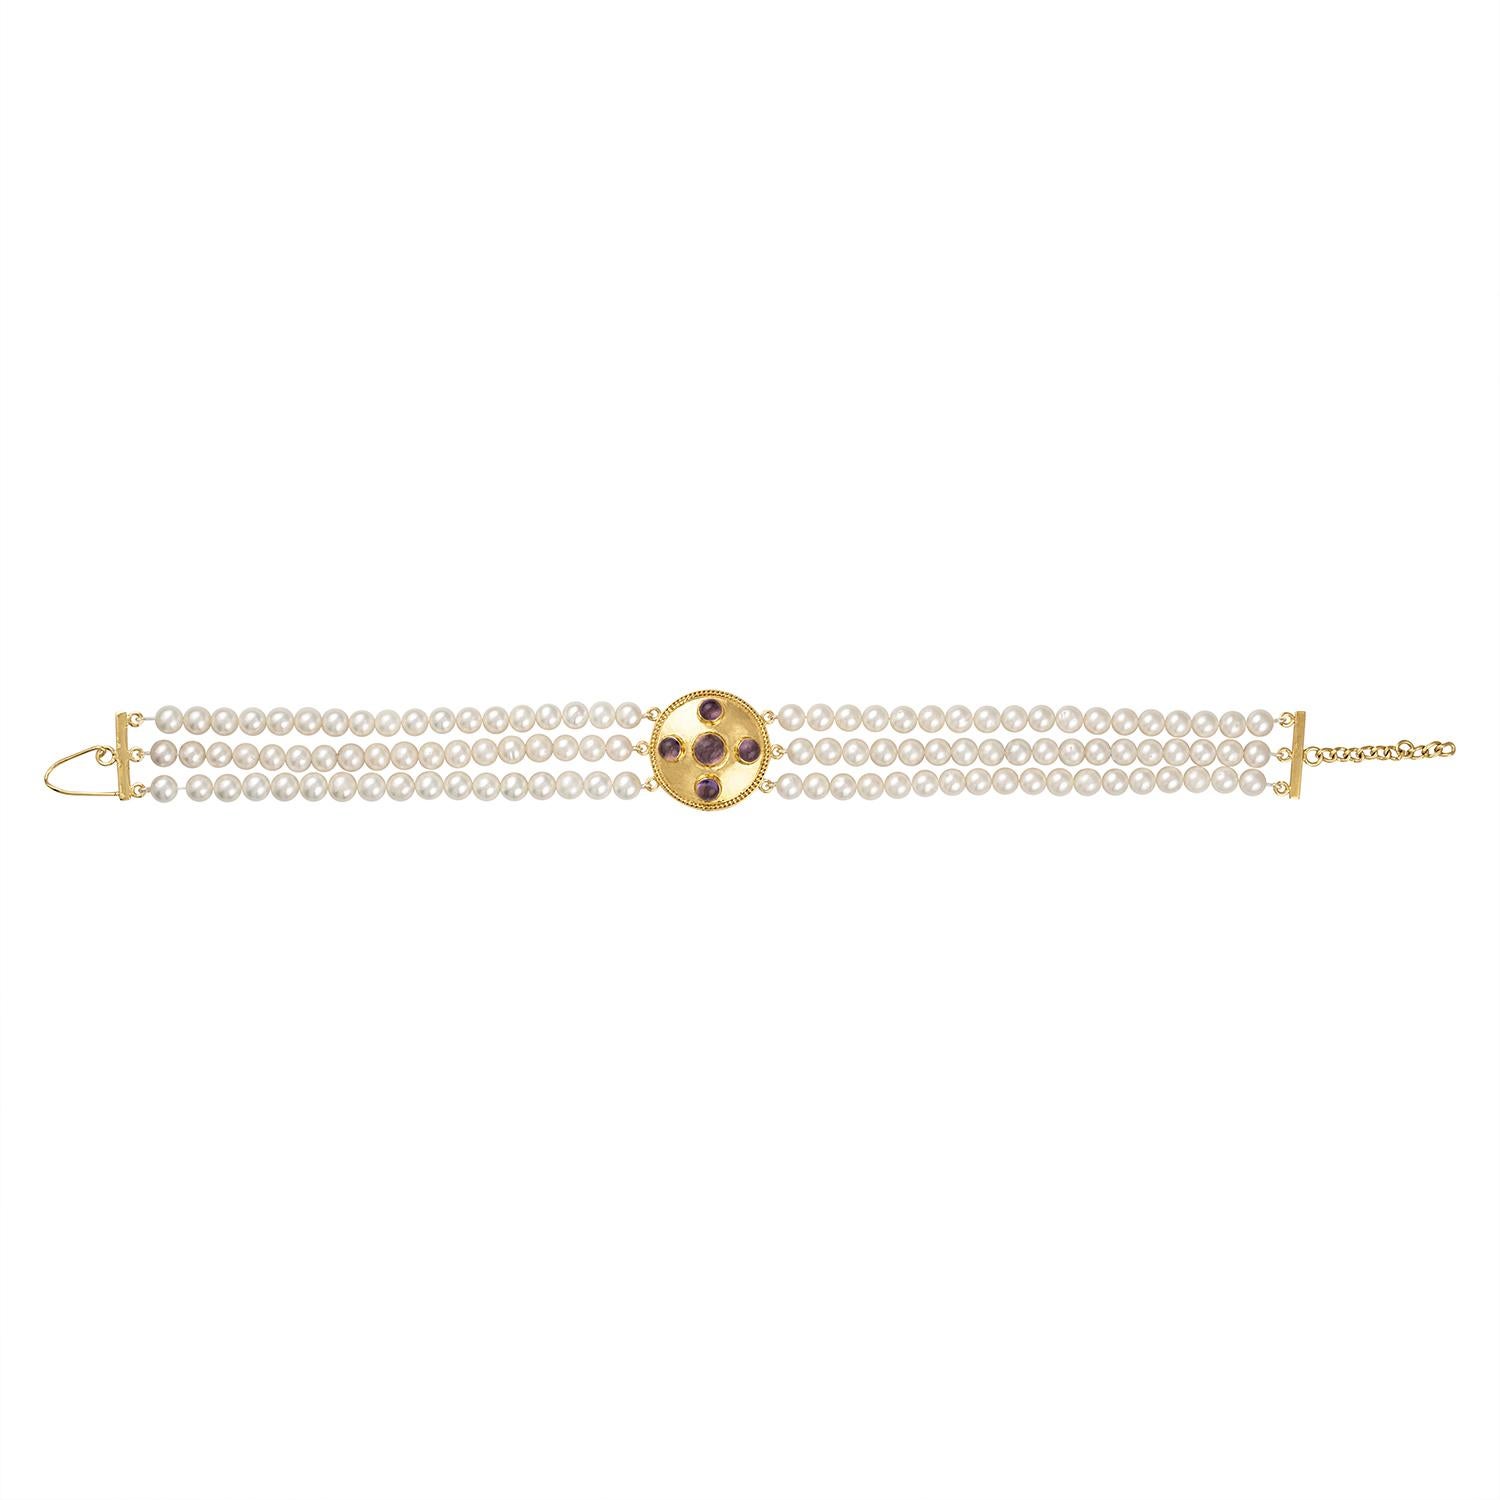 Make a statement with this triple strand pearl necklace that is indicative of the Gilded Age times. Channel your inner Consuelo Vanderbilt, the Duchess of Marlborough, with this choker that adjusts to fit most necks.
     * Necklace is three strands